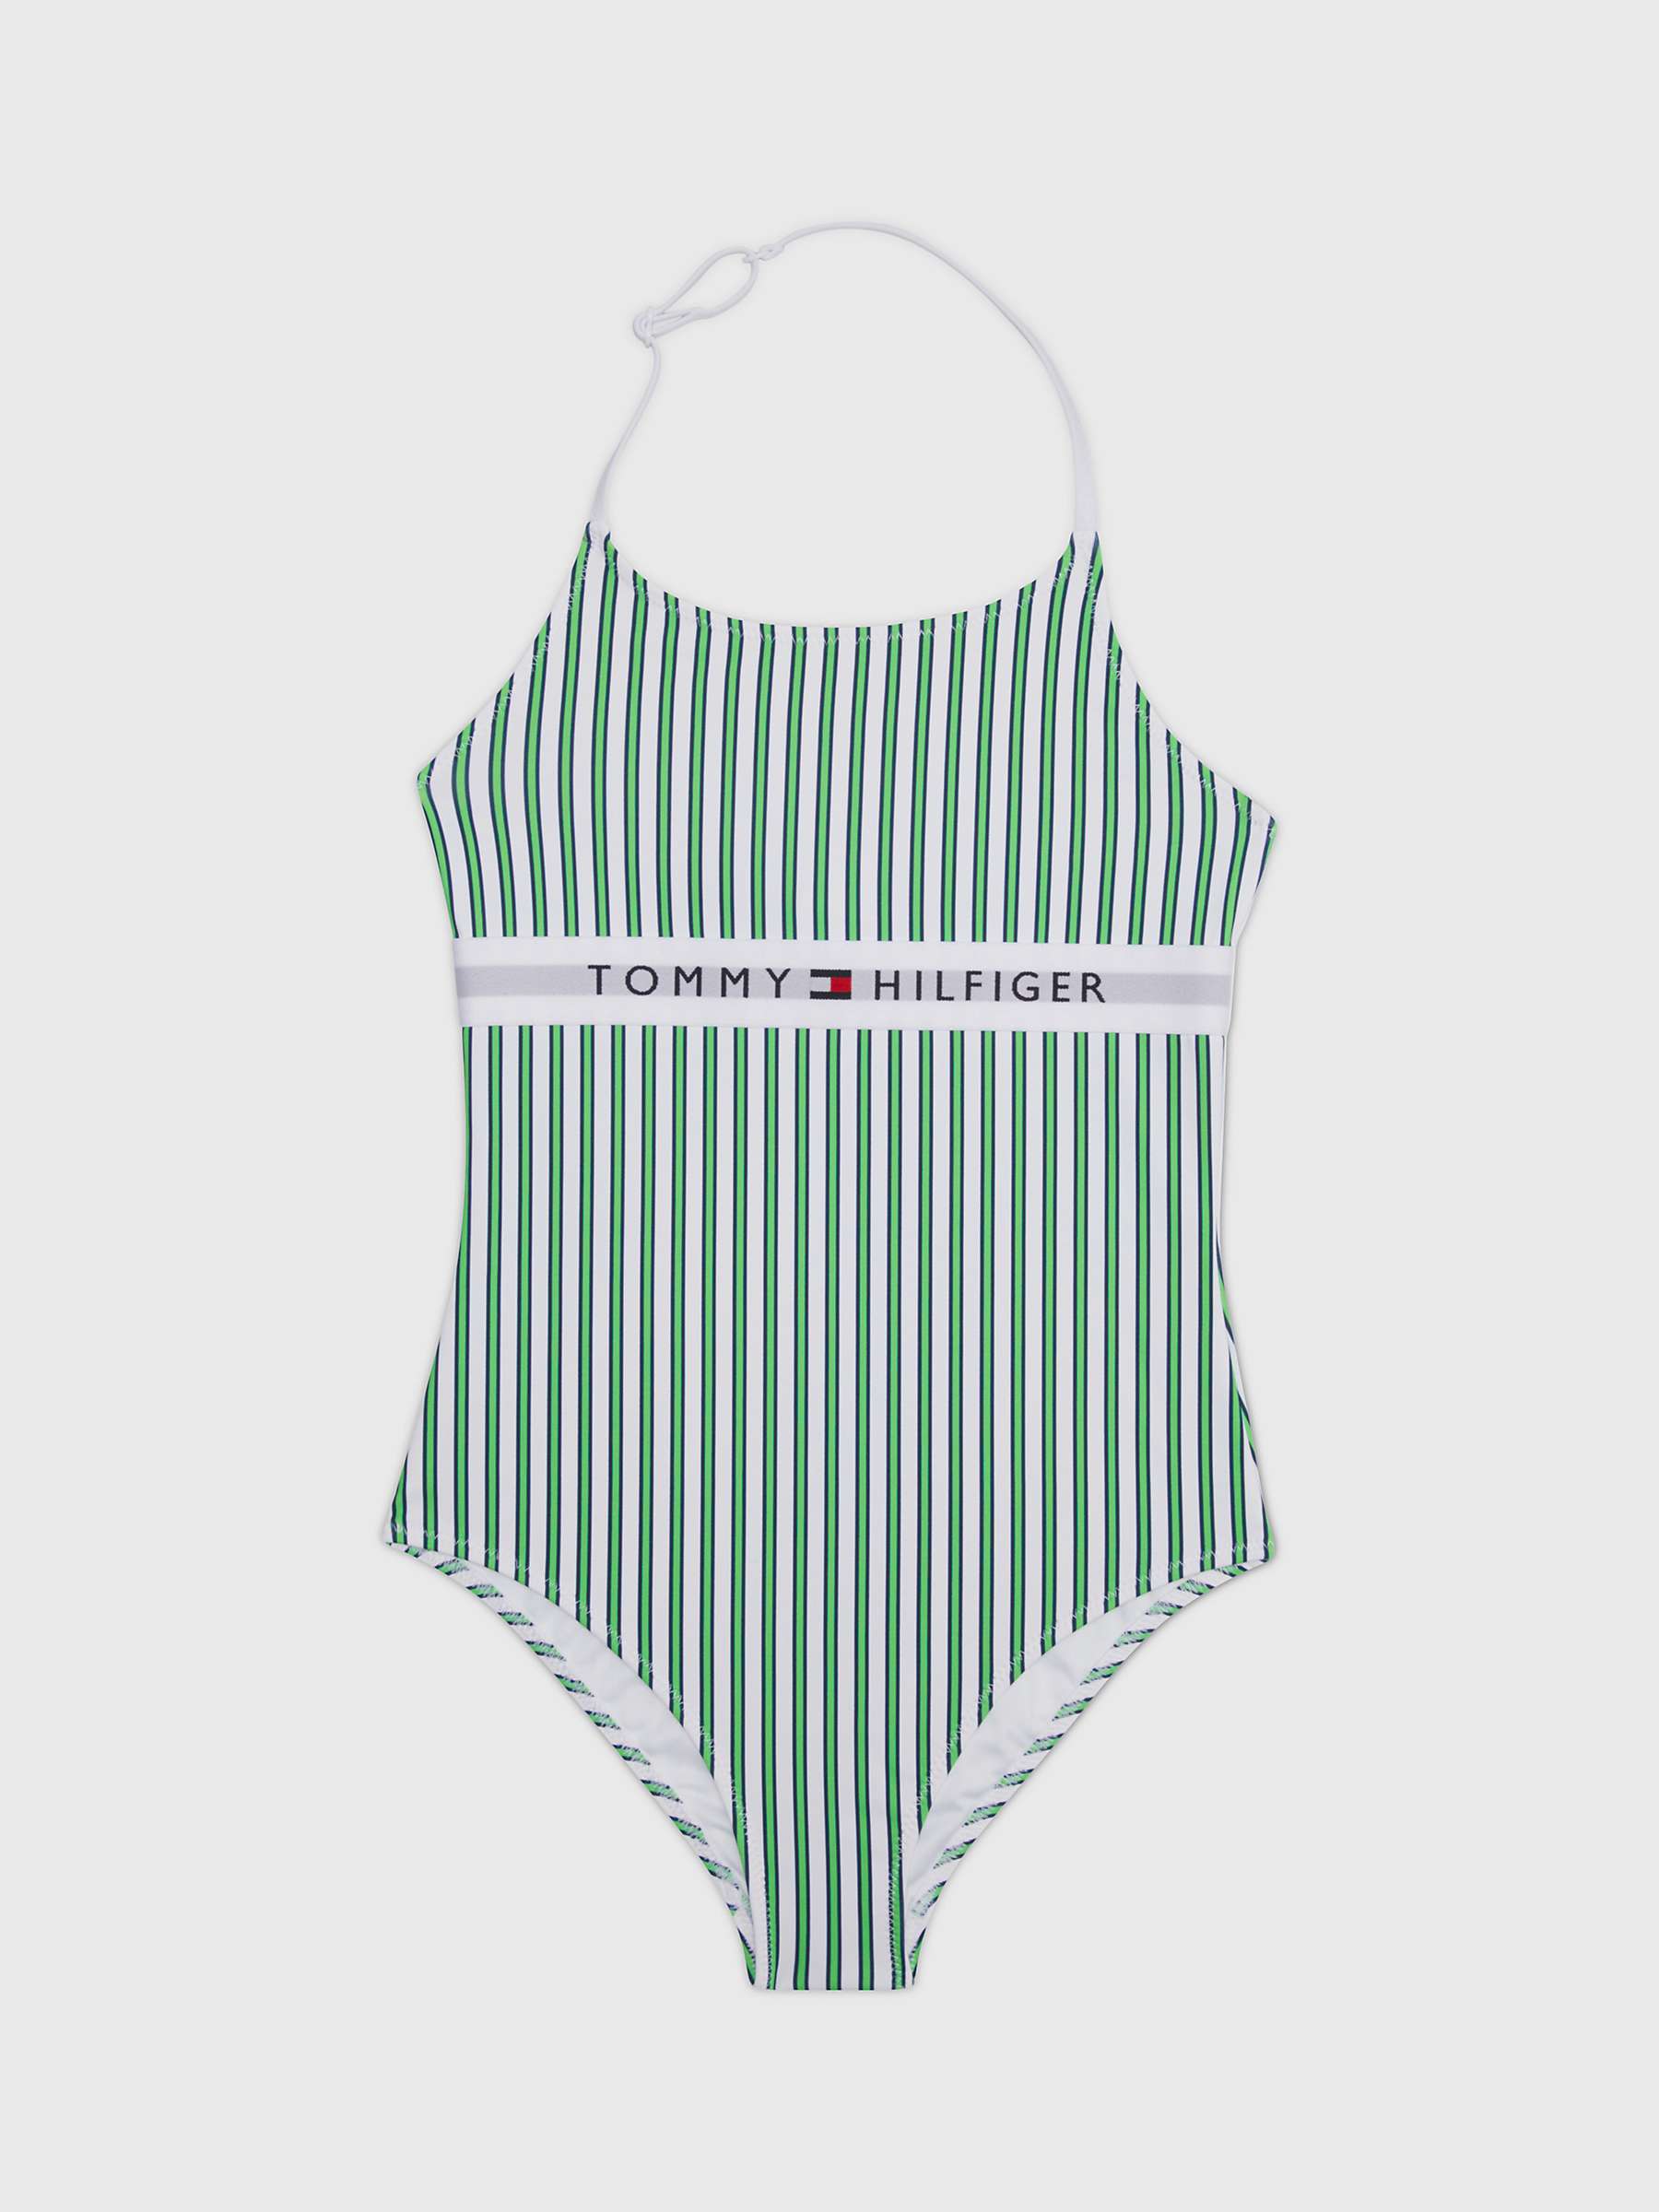 Buy Tommy Hilfiger Kids' One-Piece Swimsuit, Green Online at johnlewis.com